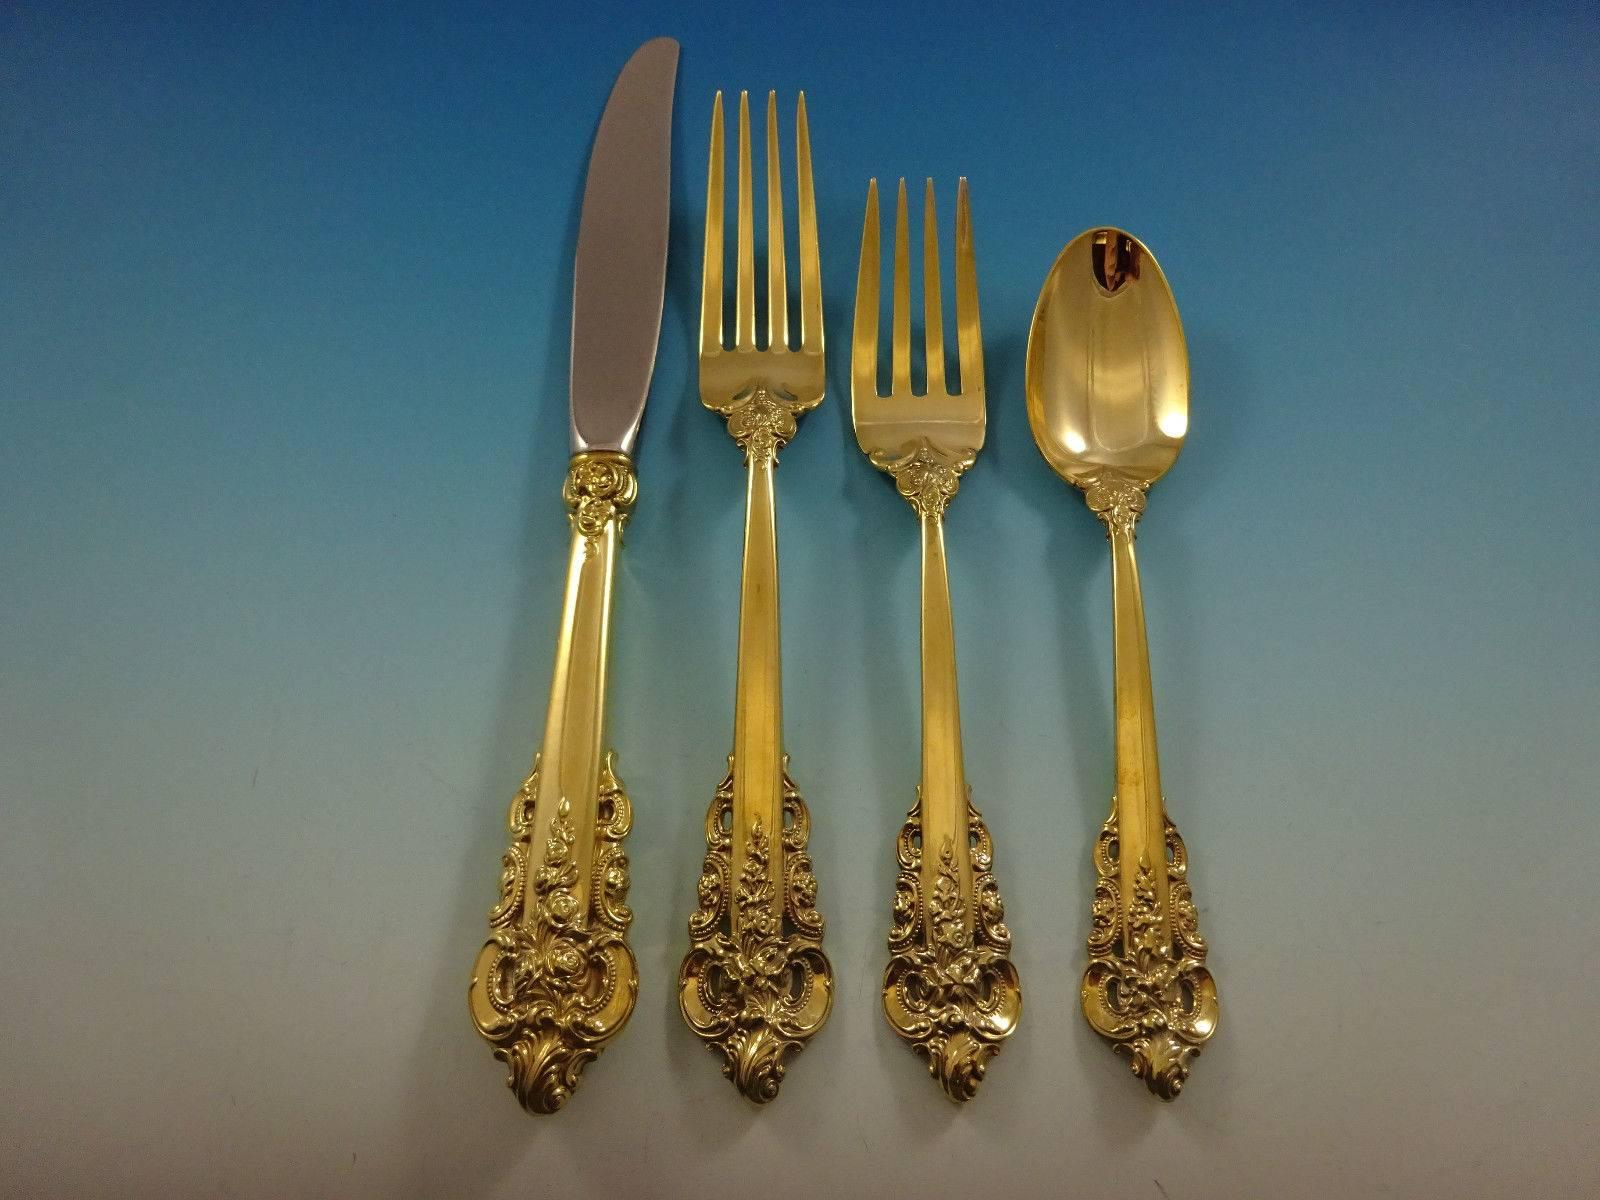 Grande Baroque by Wallace Sterling Silver flatware set - 32 pieces. Gold flatware is on trend and makes a bold statement on your table, especially when paired with gold rimmed china and gold accents. 

This set is vermeil (completely gold-washed)